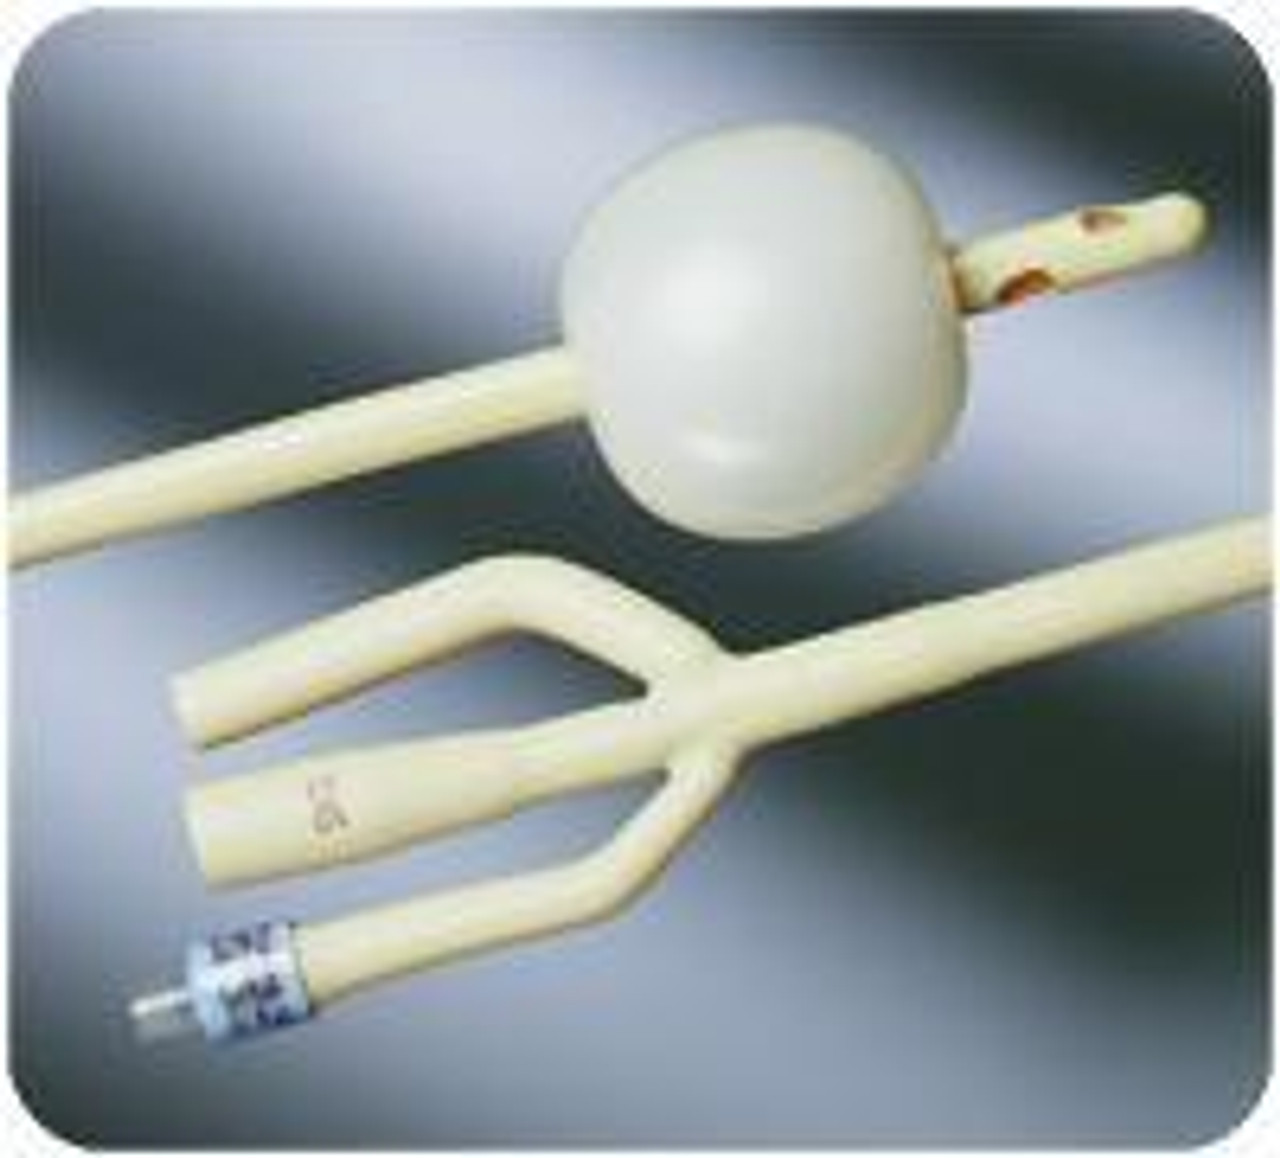 Bard 0167SI22 BX/12 INFECTION CONTROL 3-WAY FOLEY SILVER/HYDRO COATED CATH 22FR 30CC NON RETURNABLE (Bard 0167SI22)